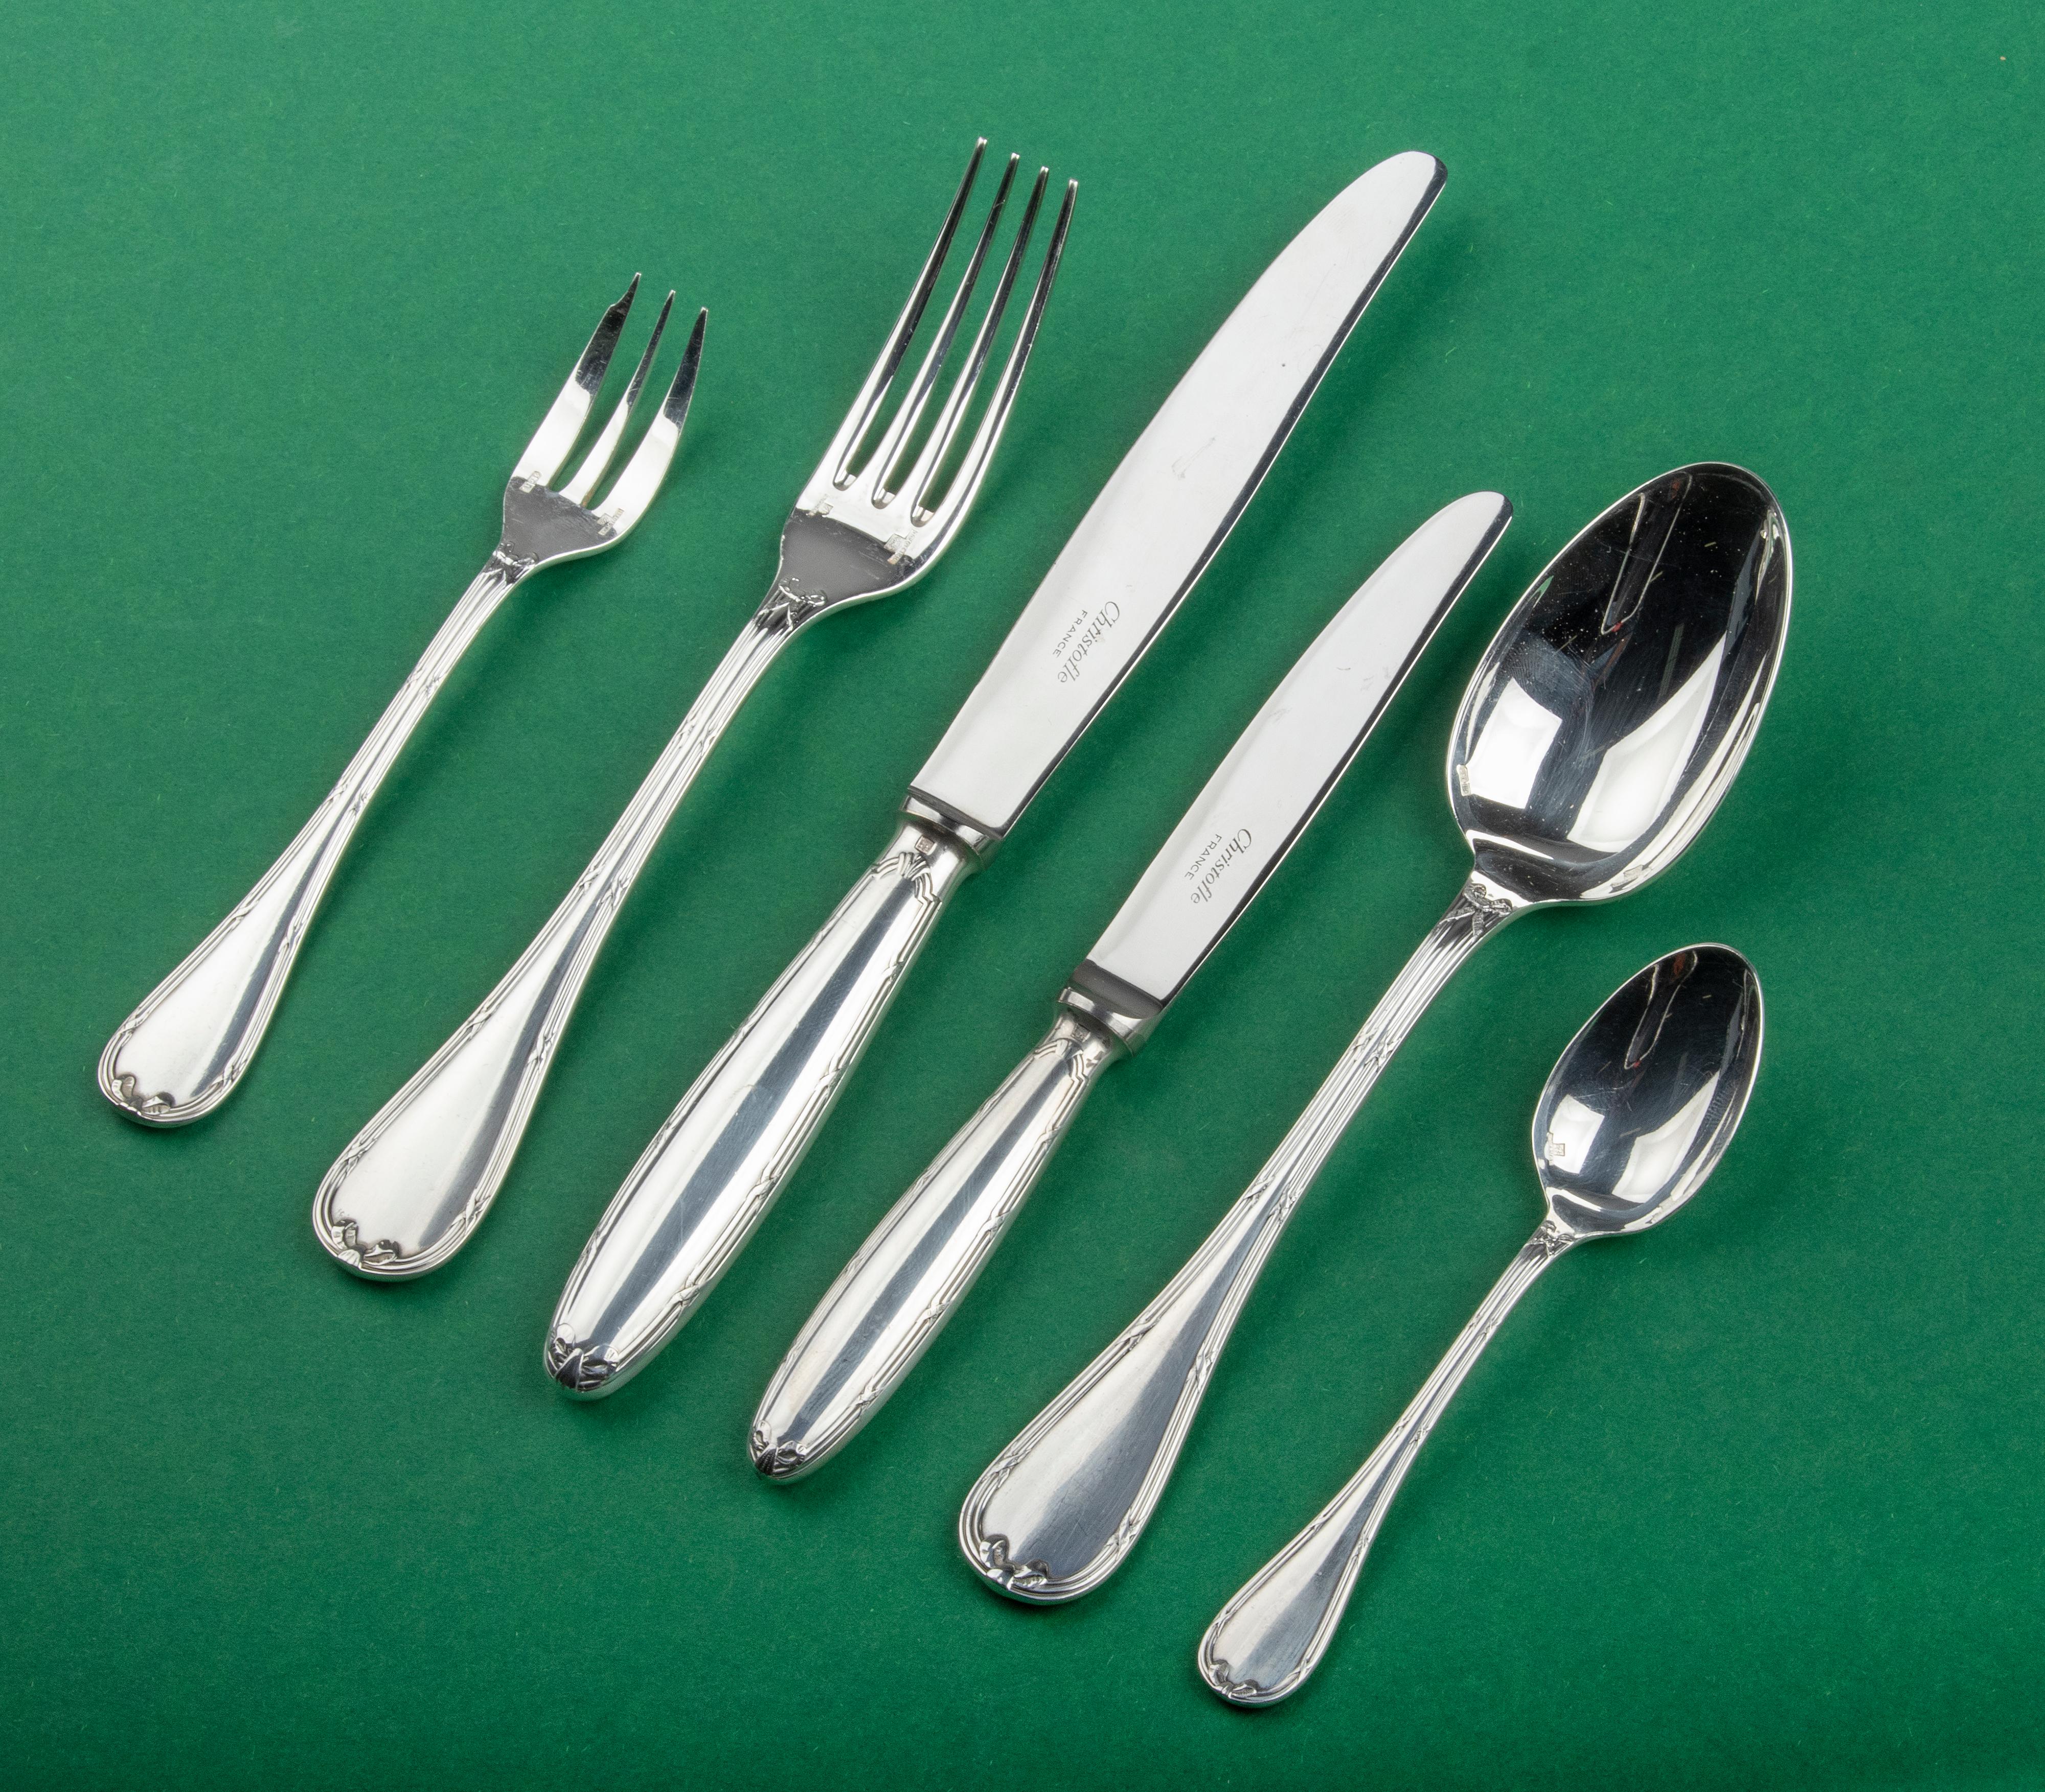 Beautiful set of silver plated flatware from the French brand Christofle. The name of the model is Rubans. This is an elegant design with a crossed ribbons and bows, typical of the Louis XVI style.
The cutlery is in very nice condition and comes in